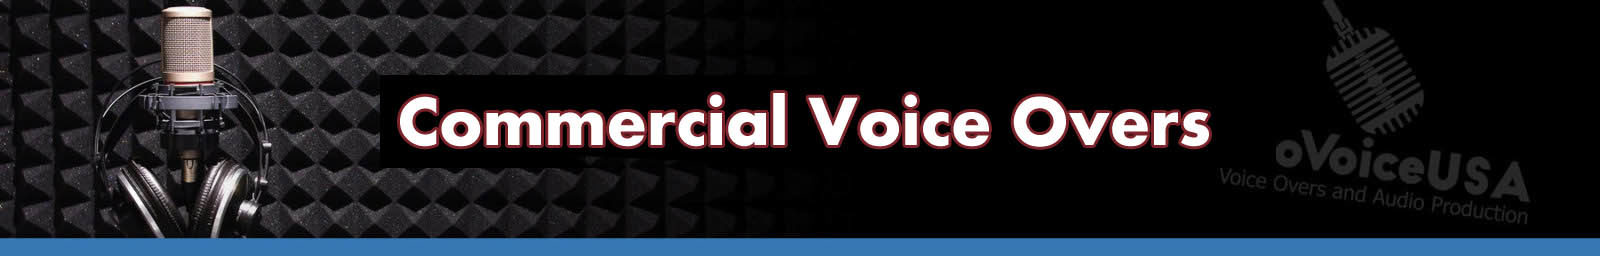 Commercial Voice Overs header